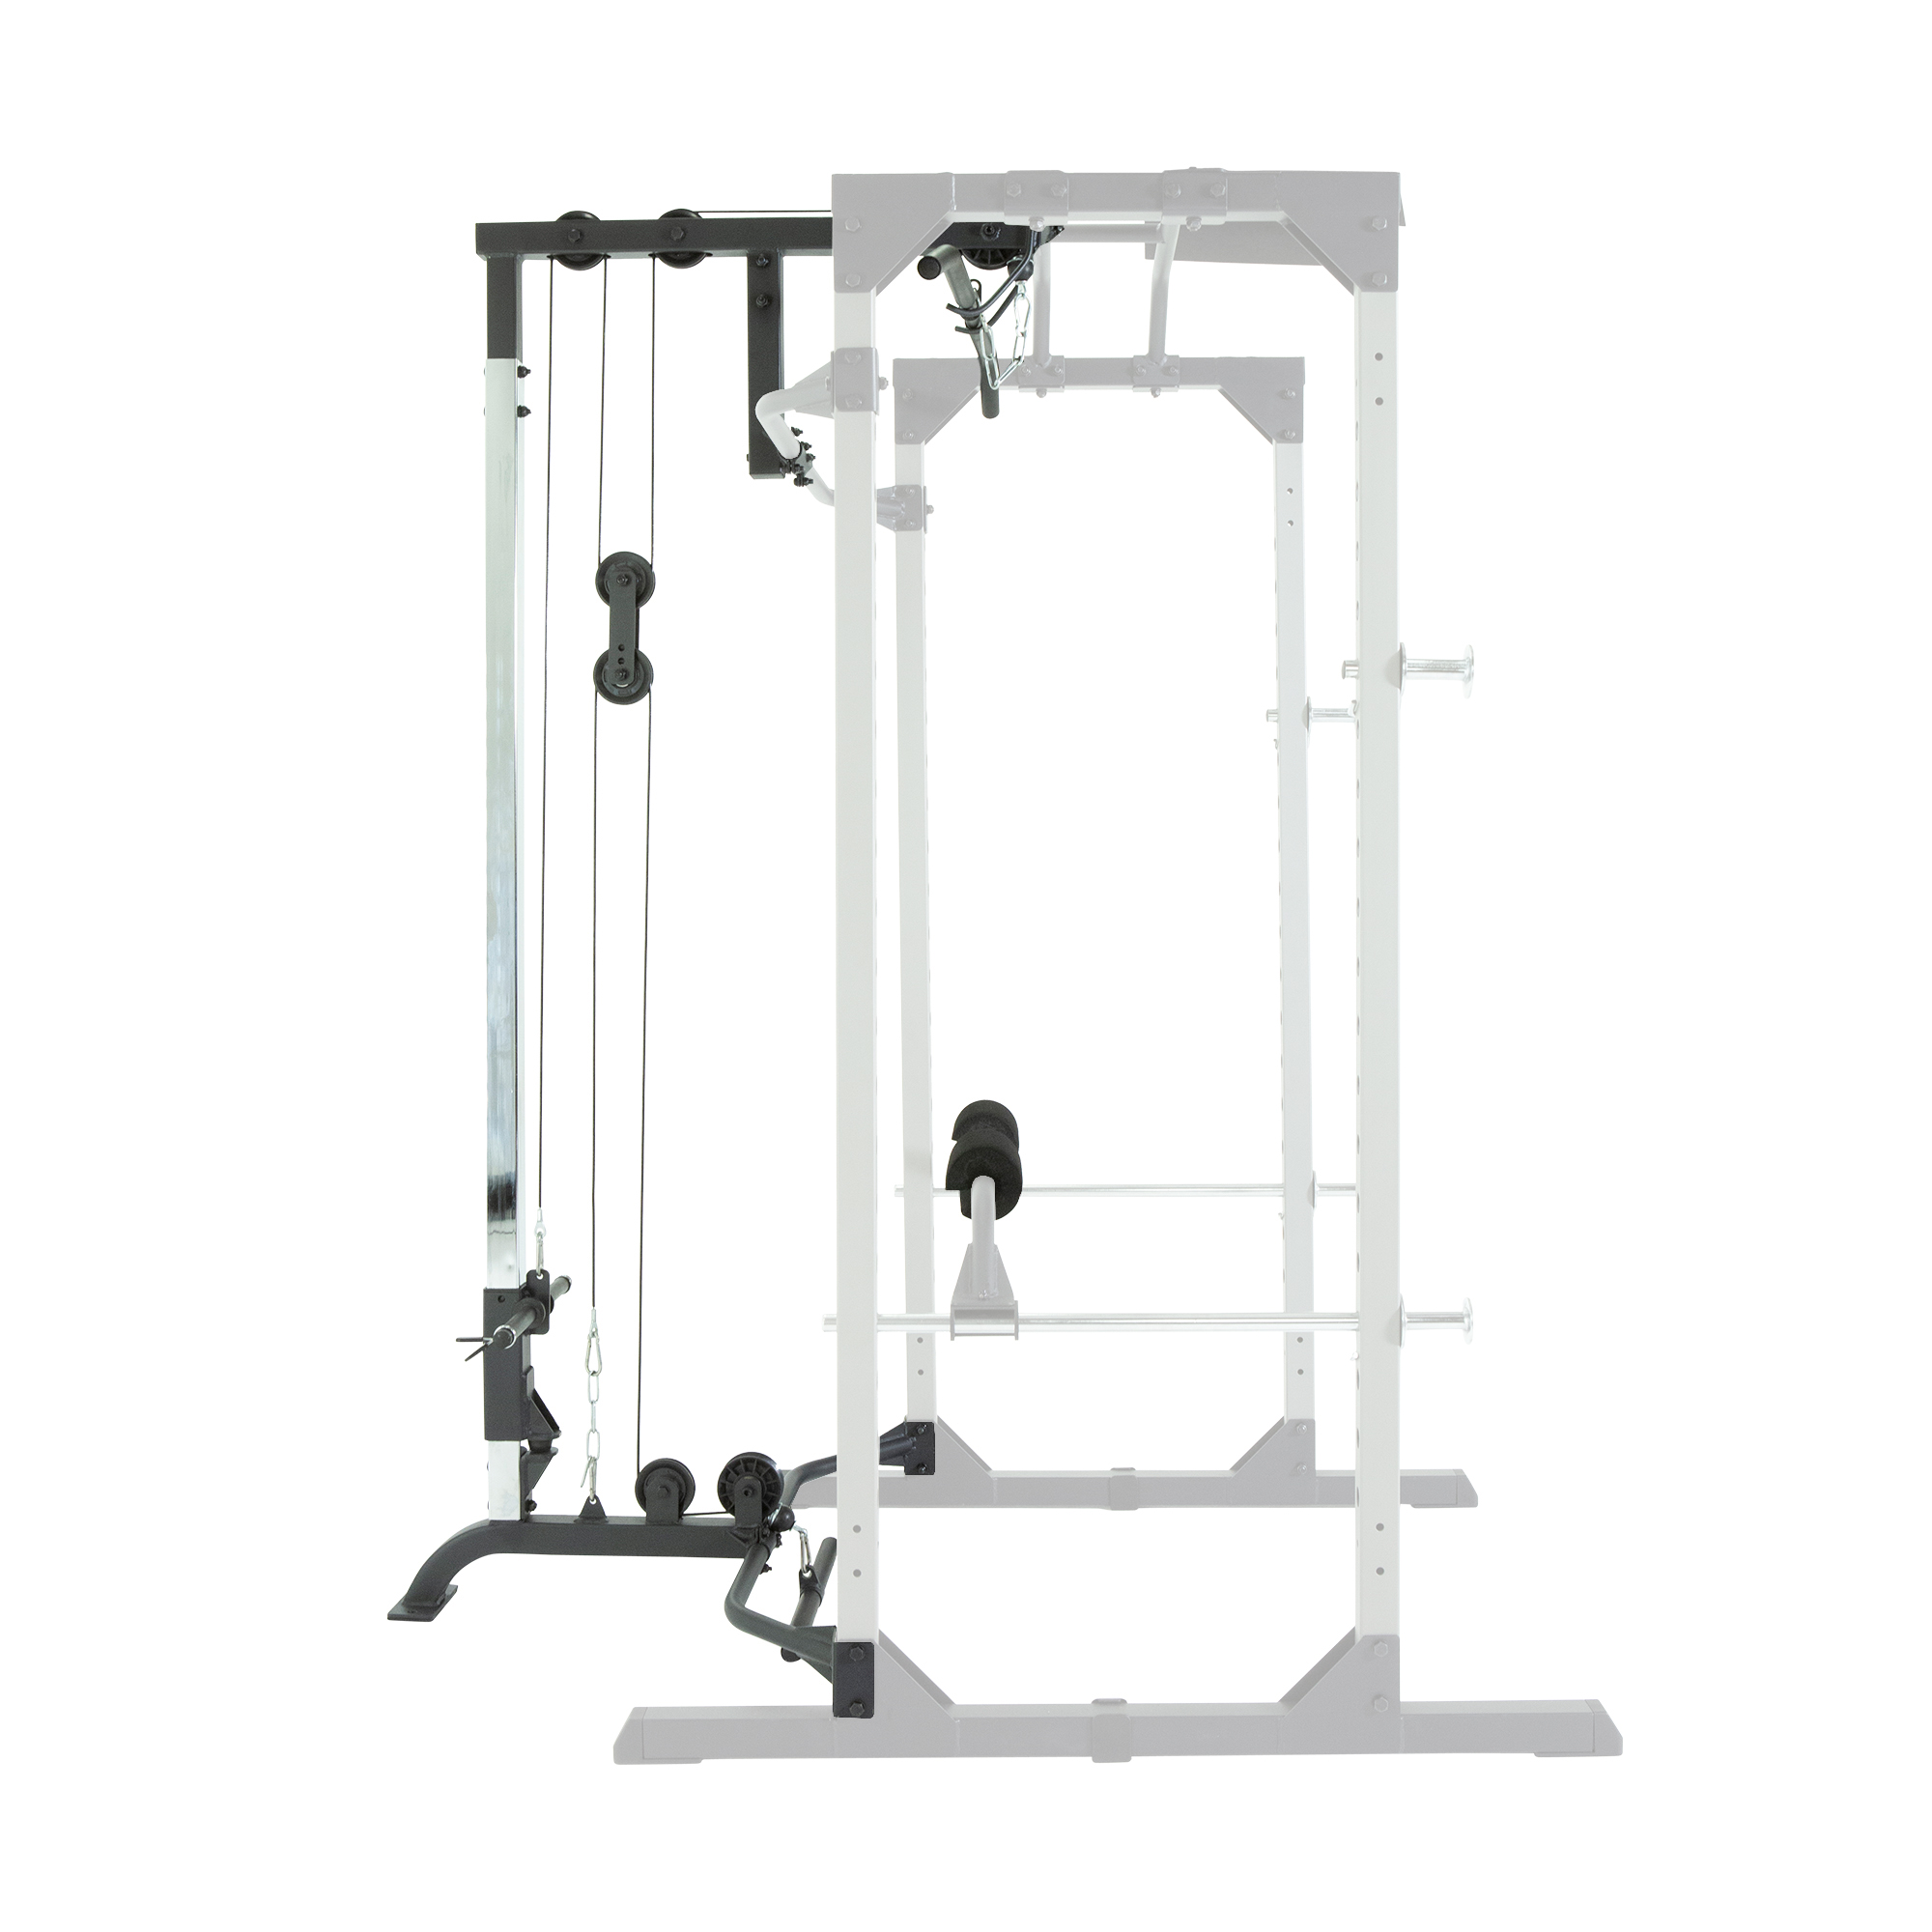 PROGEAR 310 Olympic Lat Pull Down and Low Row Cable Attachment for Progear 1600 Ultra Strength 800lb Weight Capacity Squat Stand Power Rack Cage with Lock-in J-Hooks - image 4 of 20